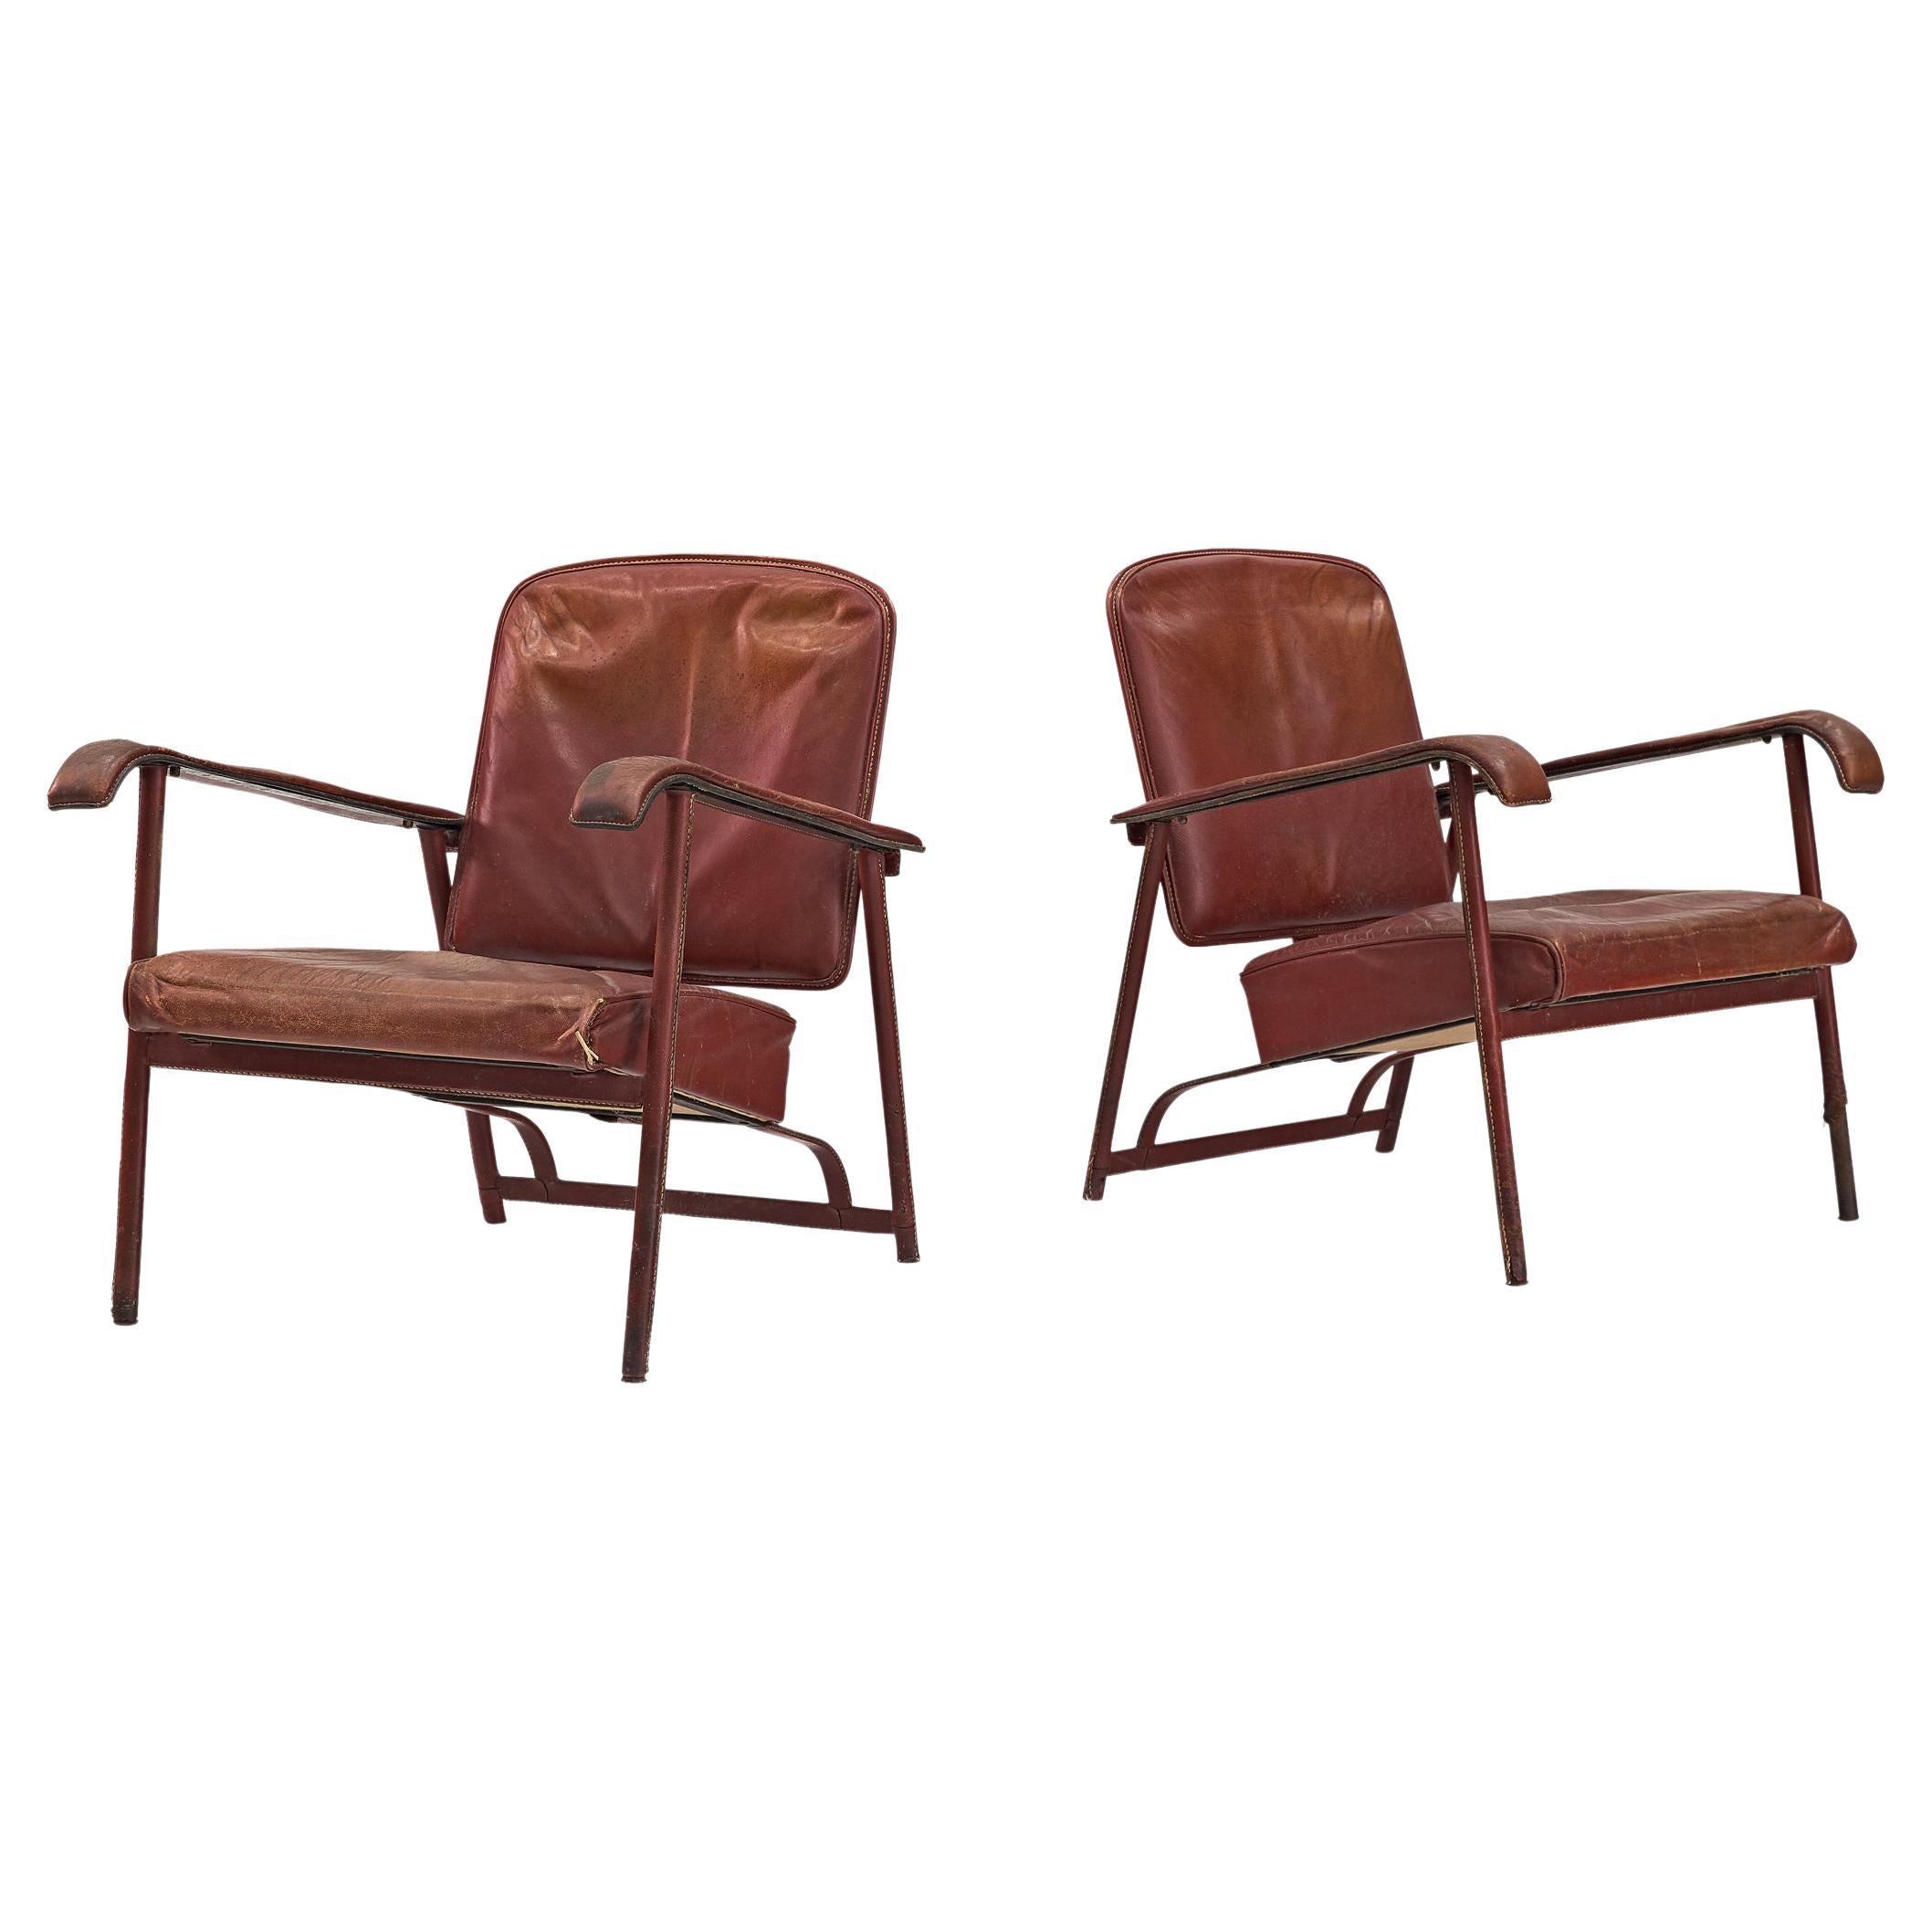 Jacques Adnet Pair of Lounge Chairs in Patinated Burgundy Leather